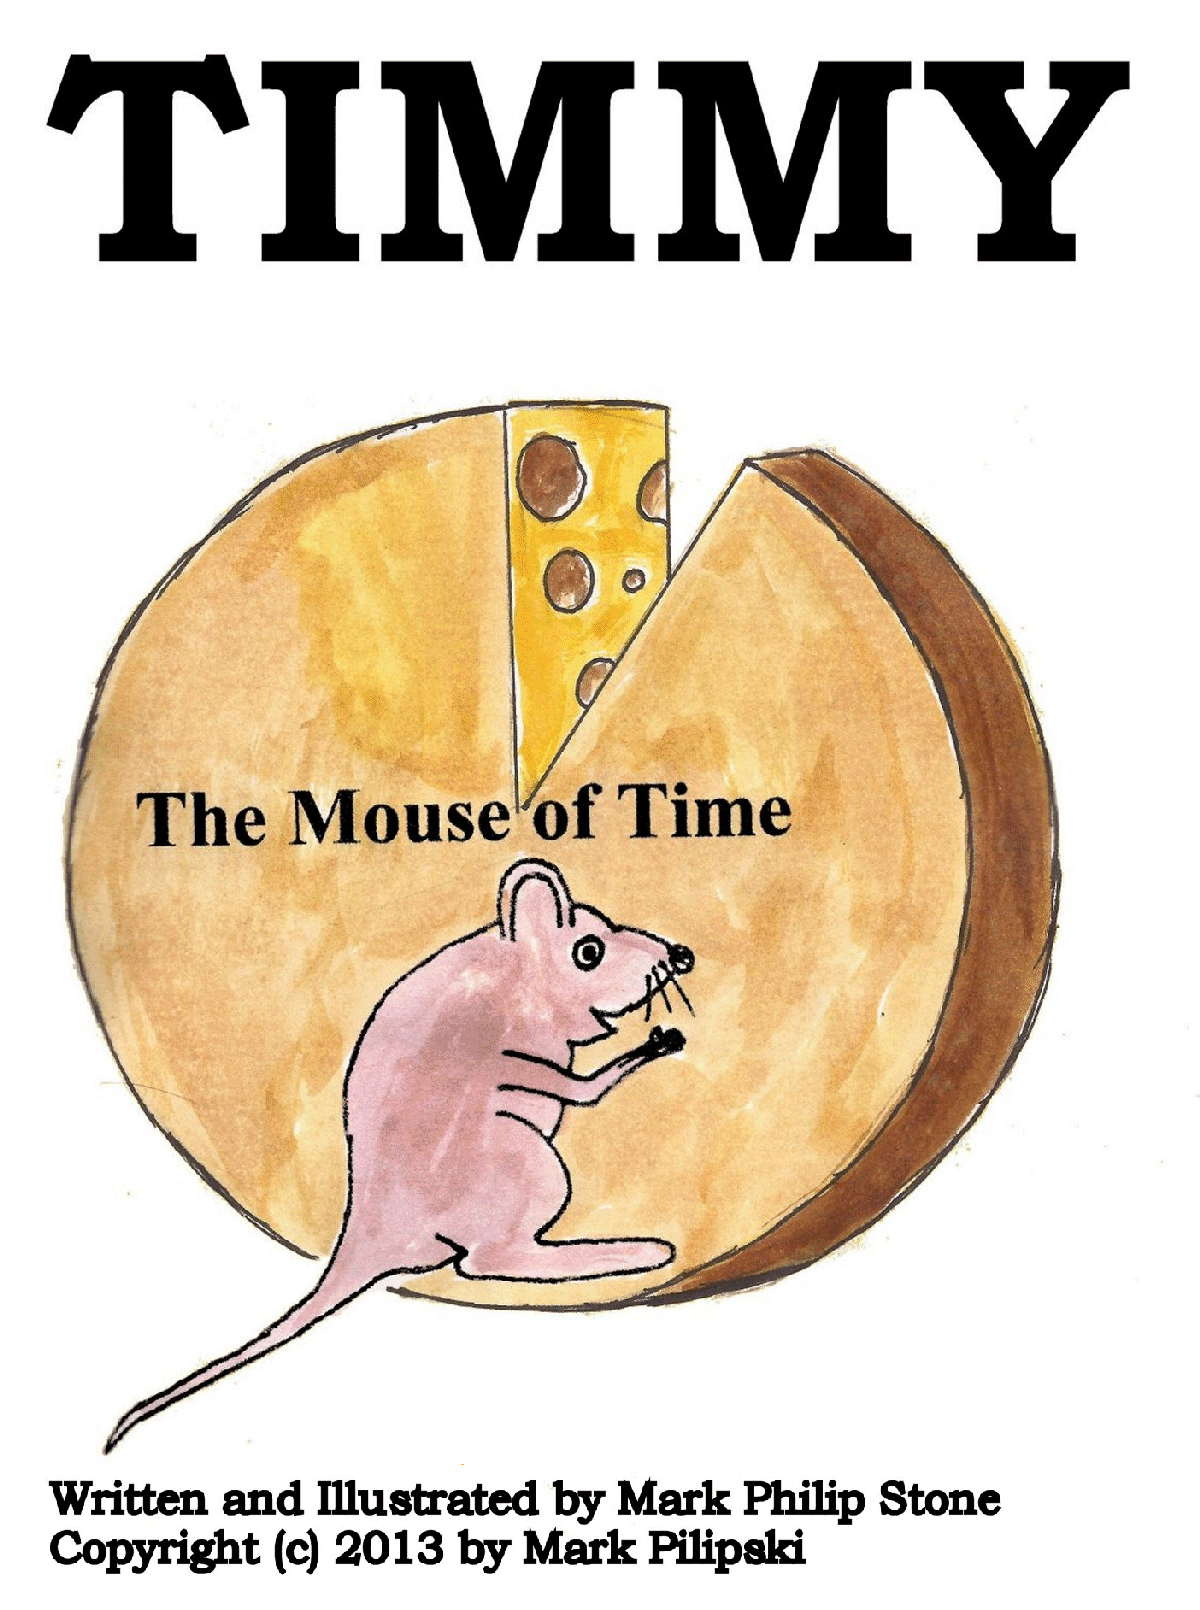 TIMMY the Mouse of Time, a childrens book